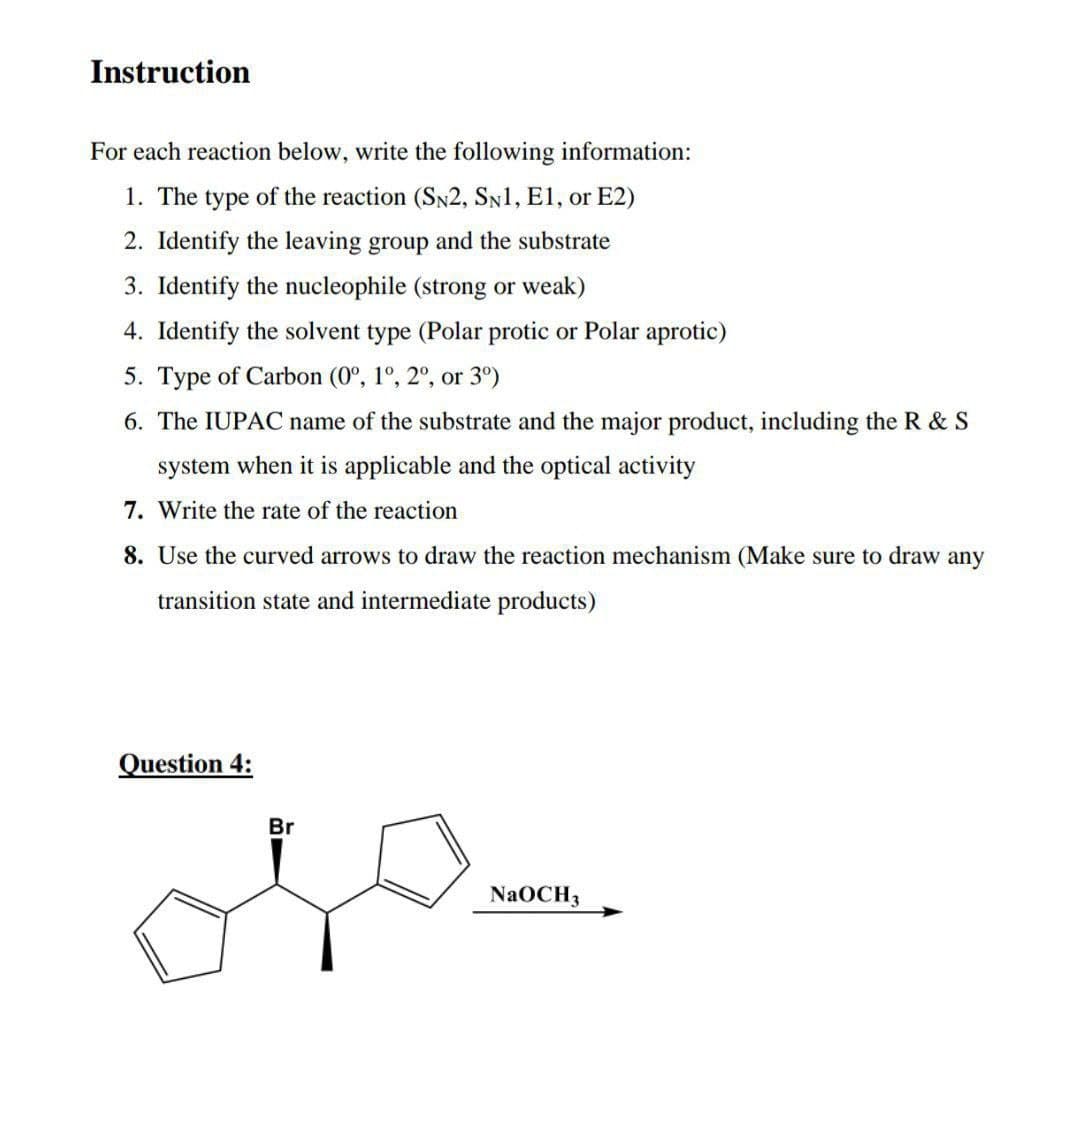 Instruction
For each reaction below, write the following information:
1. The type of the reaction (SN2, SN1, E1, or E2)
2. Identify the leaving group and the substrate
3. Identify the nucleophile (strong or weak)
4. Identify the solvent type (Polar protic or Polar aprotic)
5. Type of Carbon (0º, 1º, 2º, or 3°)
6. The IUPAC name of the substrate and the major product, including the R & S
system when it is applicable and the optical activity
7. Write the rate of the reaction
8. Use the curved arrows to draw the reaction mechanism (Make sure to draw any
transition state and intermediate products)
Question 4:
Br
NaOCH3